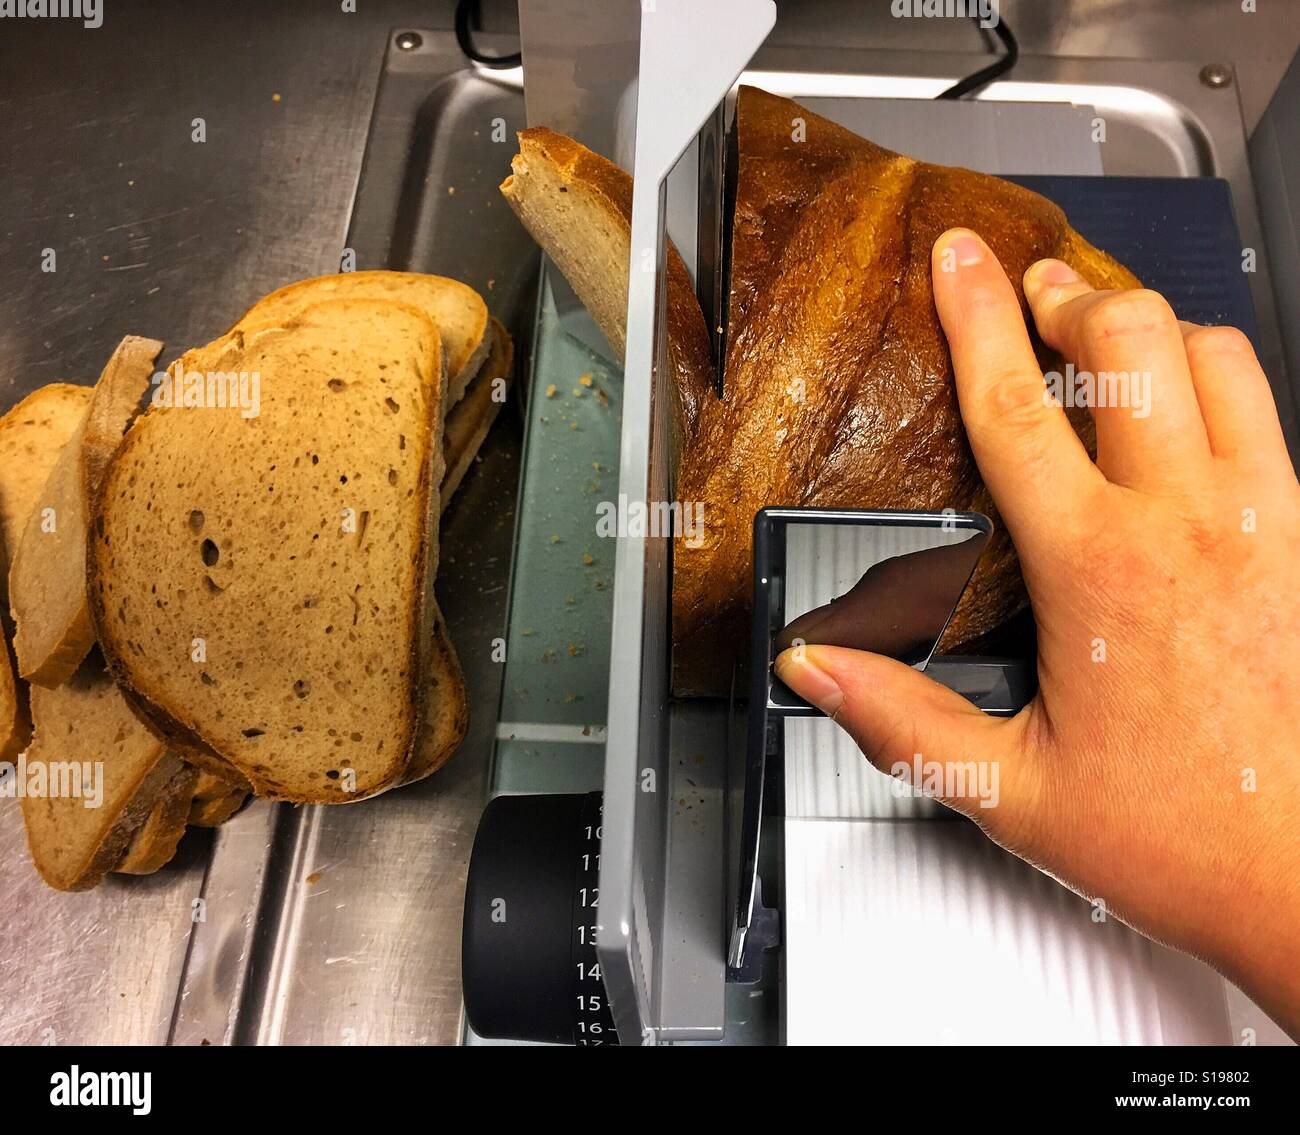 https://c8.alamy.com/comp/S19802/hand-cutting-bread-with-a-bread-slicer-machine-S19802.jpg